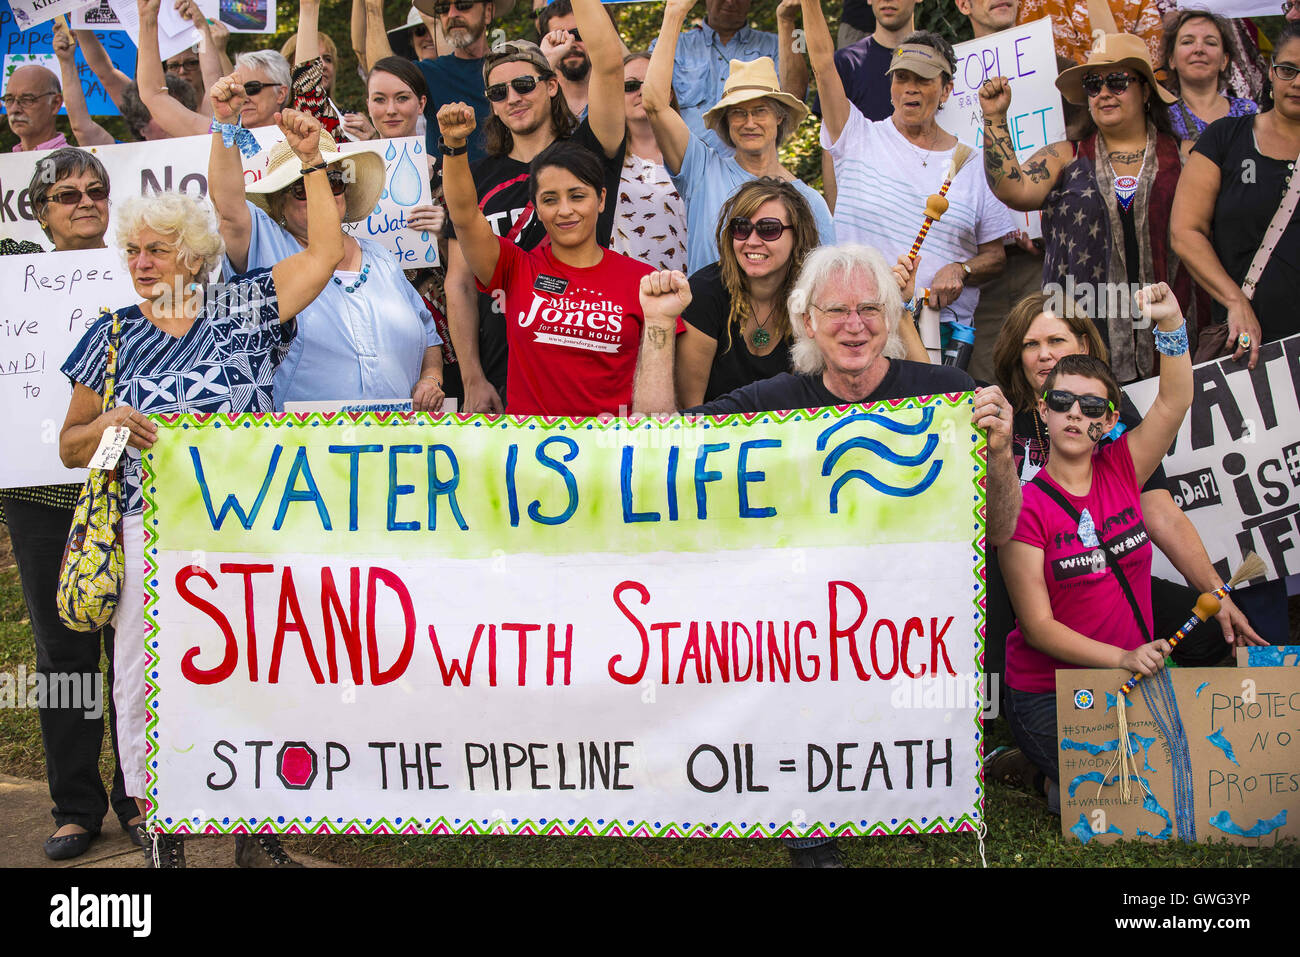 Decatur, Georgia, USA. 13th Sep, 2016. The Georgia Chapter of the Sierra Club holds a rally to demonstrate opposition to the building of the Dakota Access Pipeline and show support for the indigenous leaders in North Dakota who are protesting against its construction. The organizers of the rally call on President Obama to instruct the Army Corps of Engineers to revoke the construction permits for the oil pipeline. © Steve Eberhardt/ZUMA Wire/Alamy Live News Stock Photo